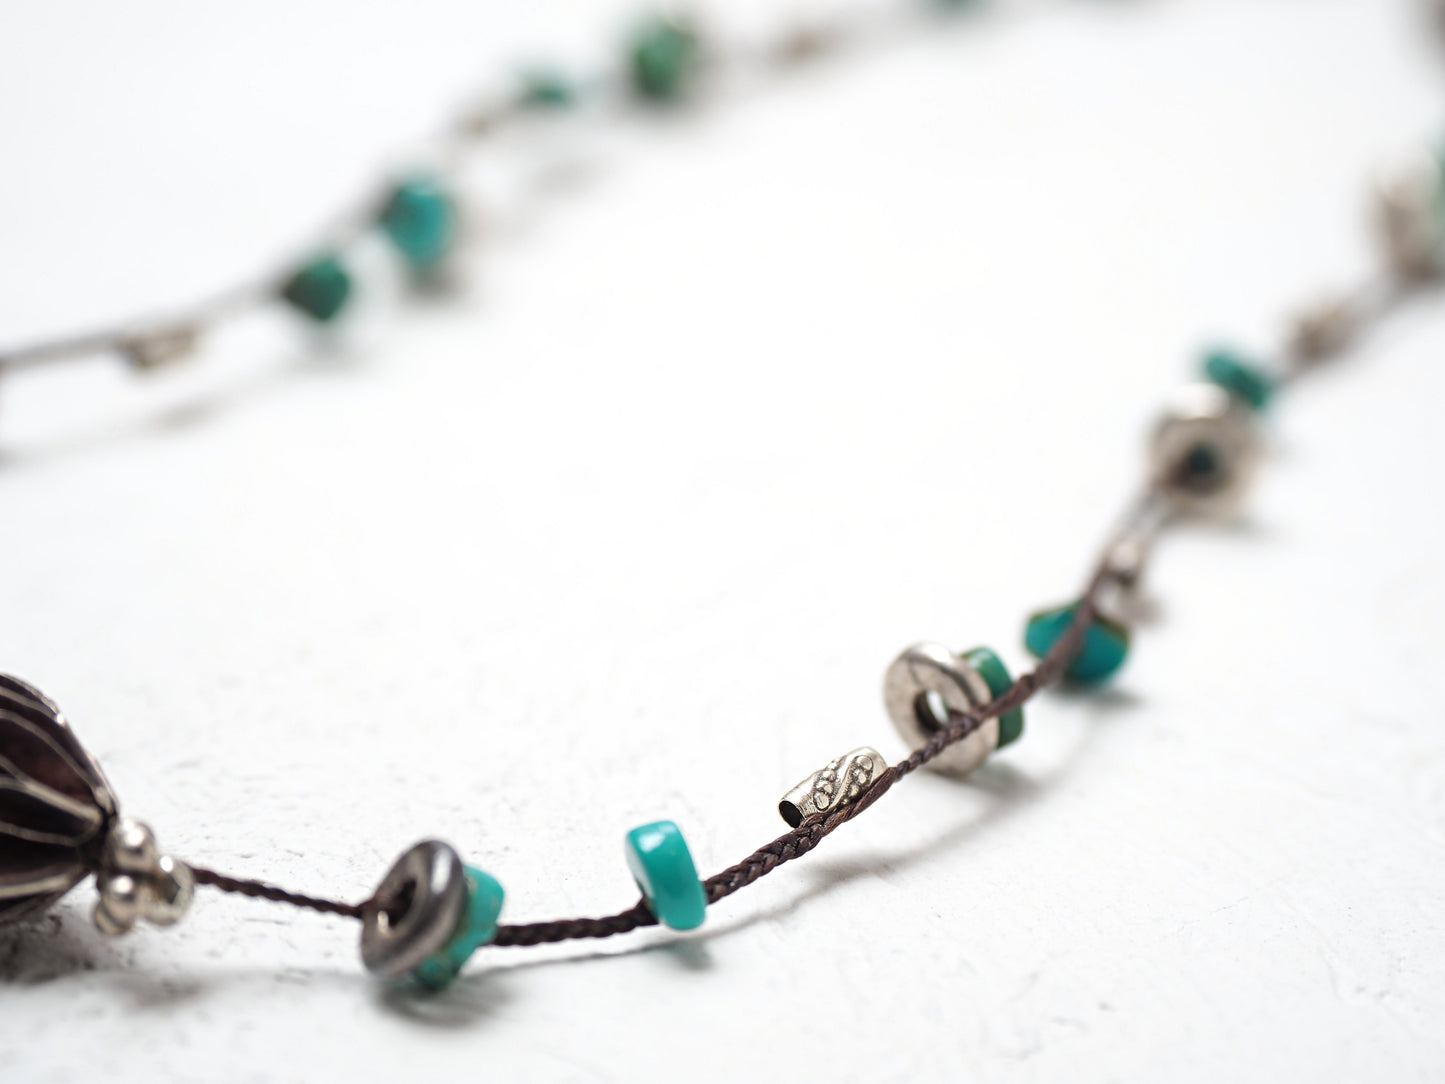 [Turquoise_Silver] Braided string necklace